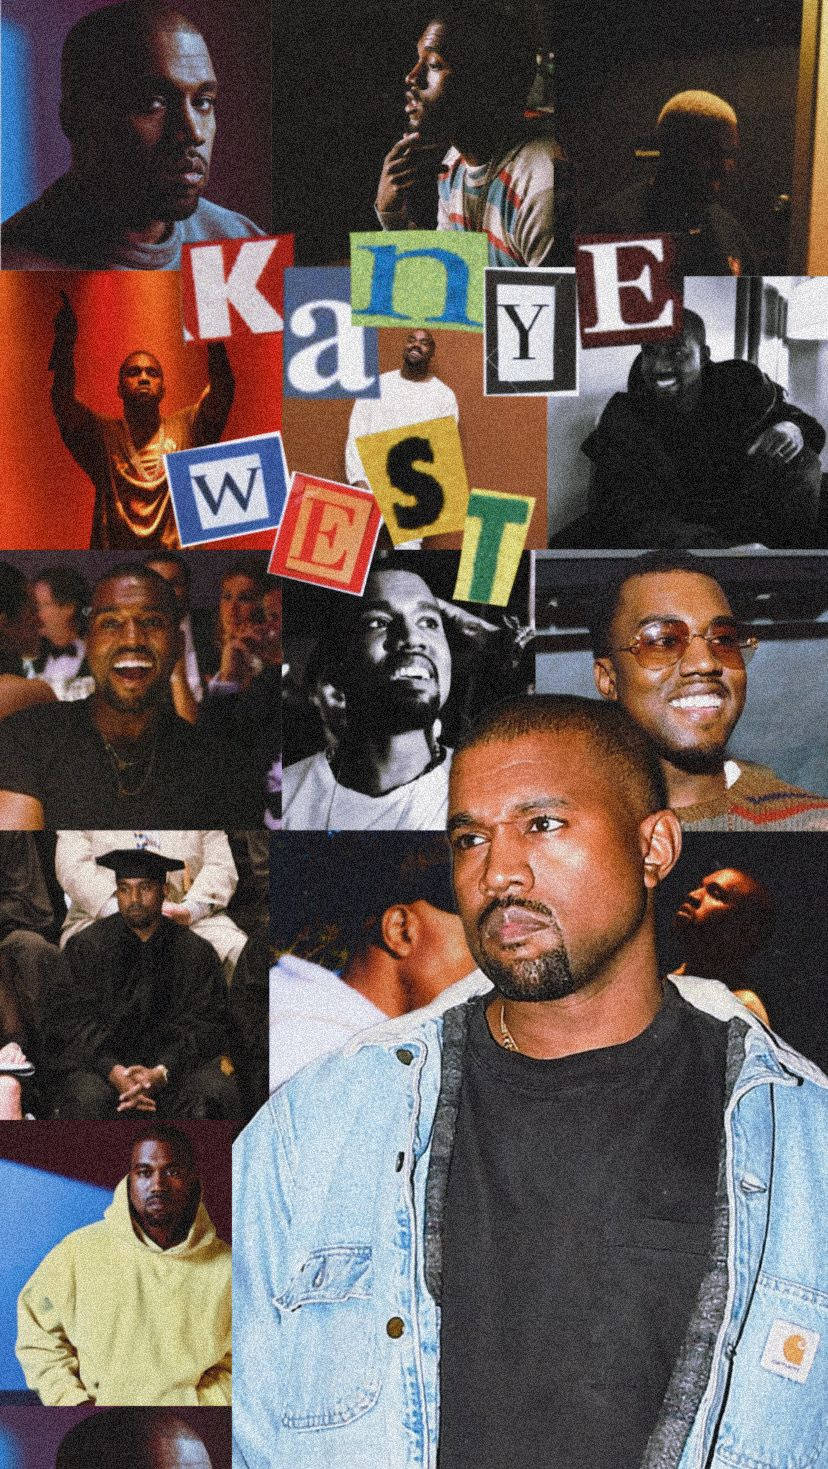 Kanye West's Classic Album Cover For 'the College Dropout' Wallpaper